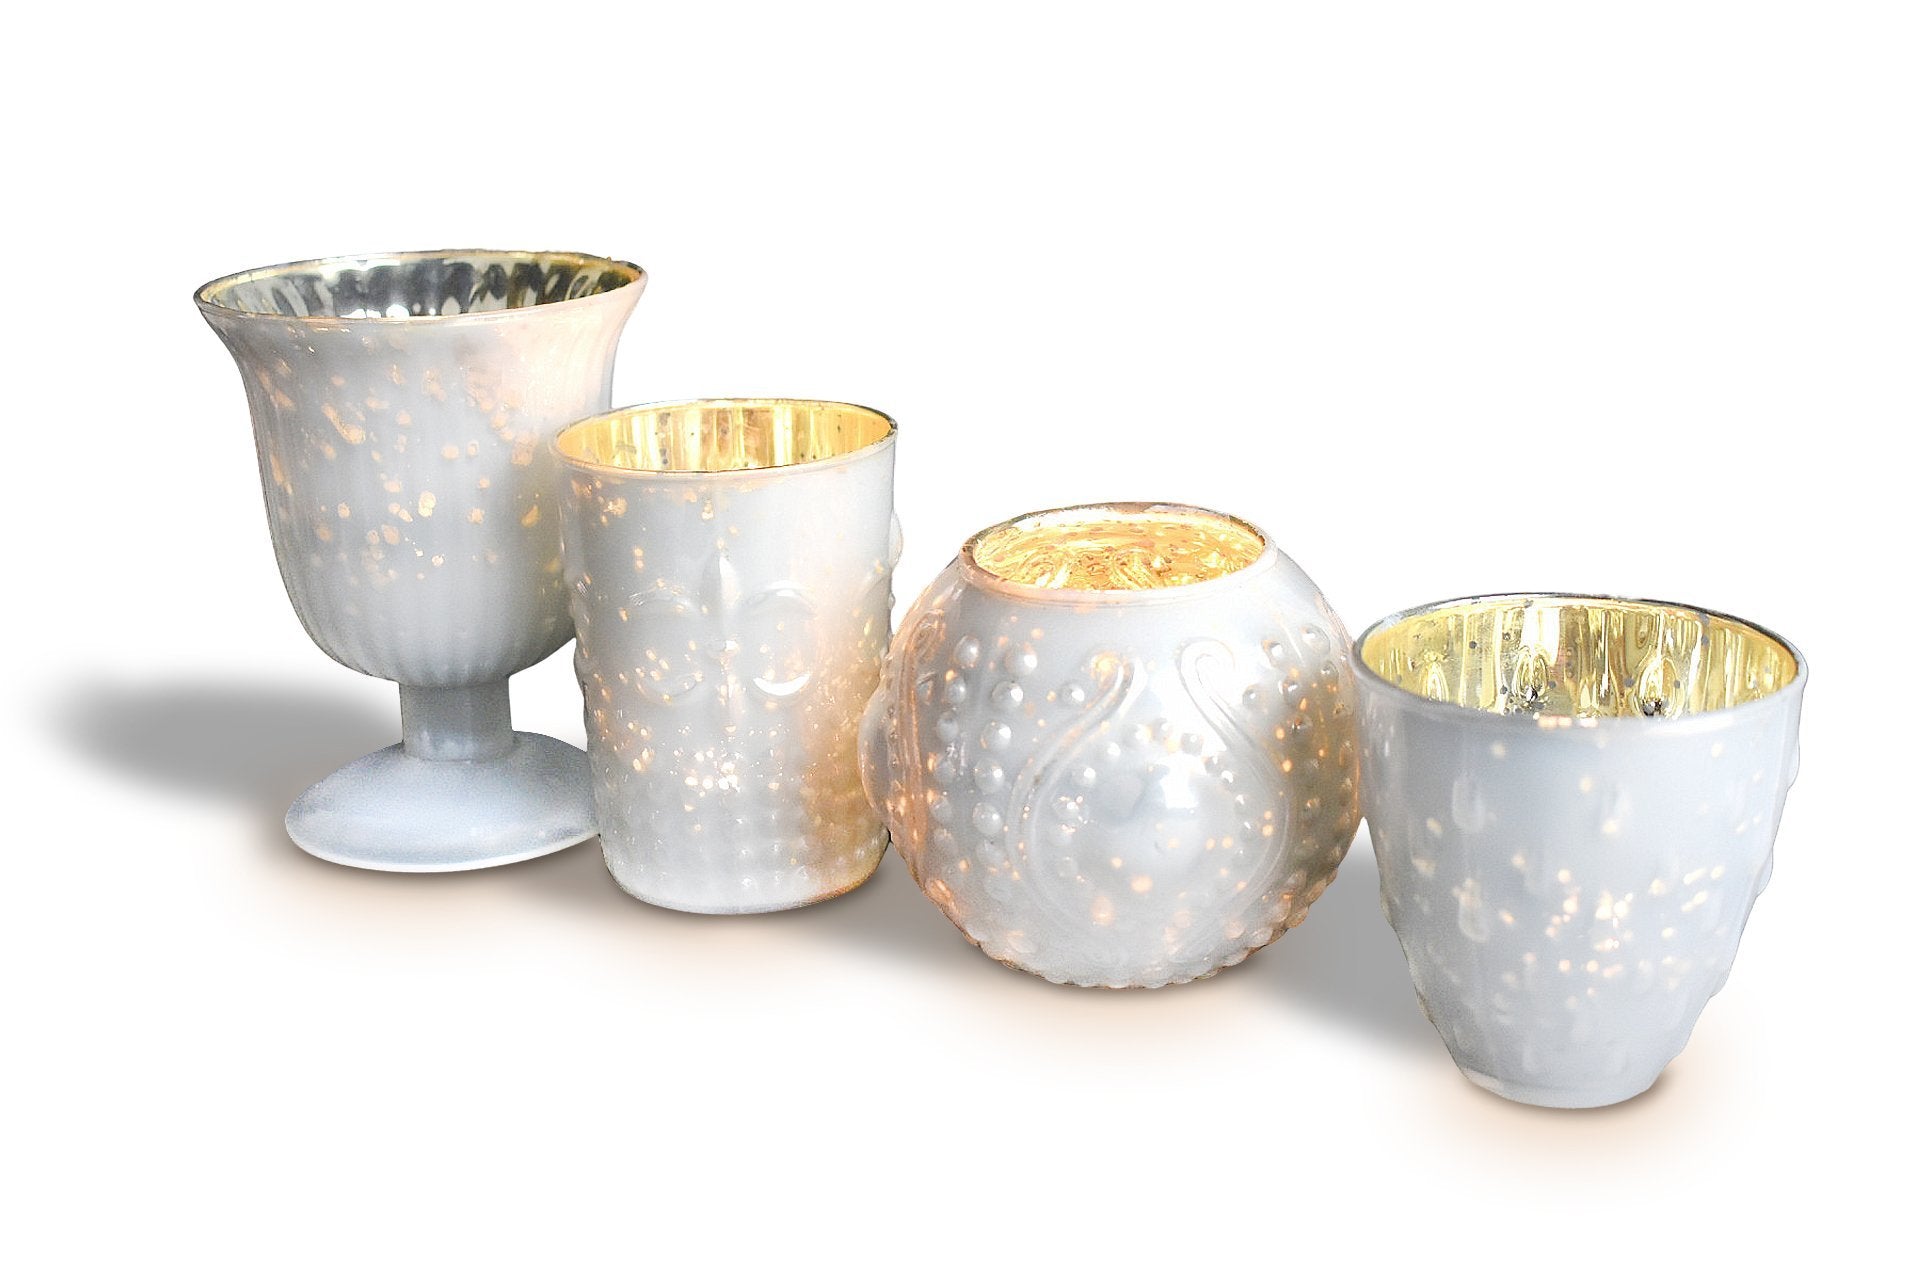 Vintage Glam Mercury Glass Tealight Votive Candle Holders (Pearl White, Set of 4, Assorted Designs and Sizes) - for Weddings, Events and Home Décor - PaperLanternStore.com - Paper Lanterns, Decor, Party Lights & More